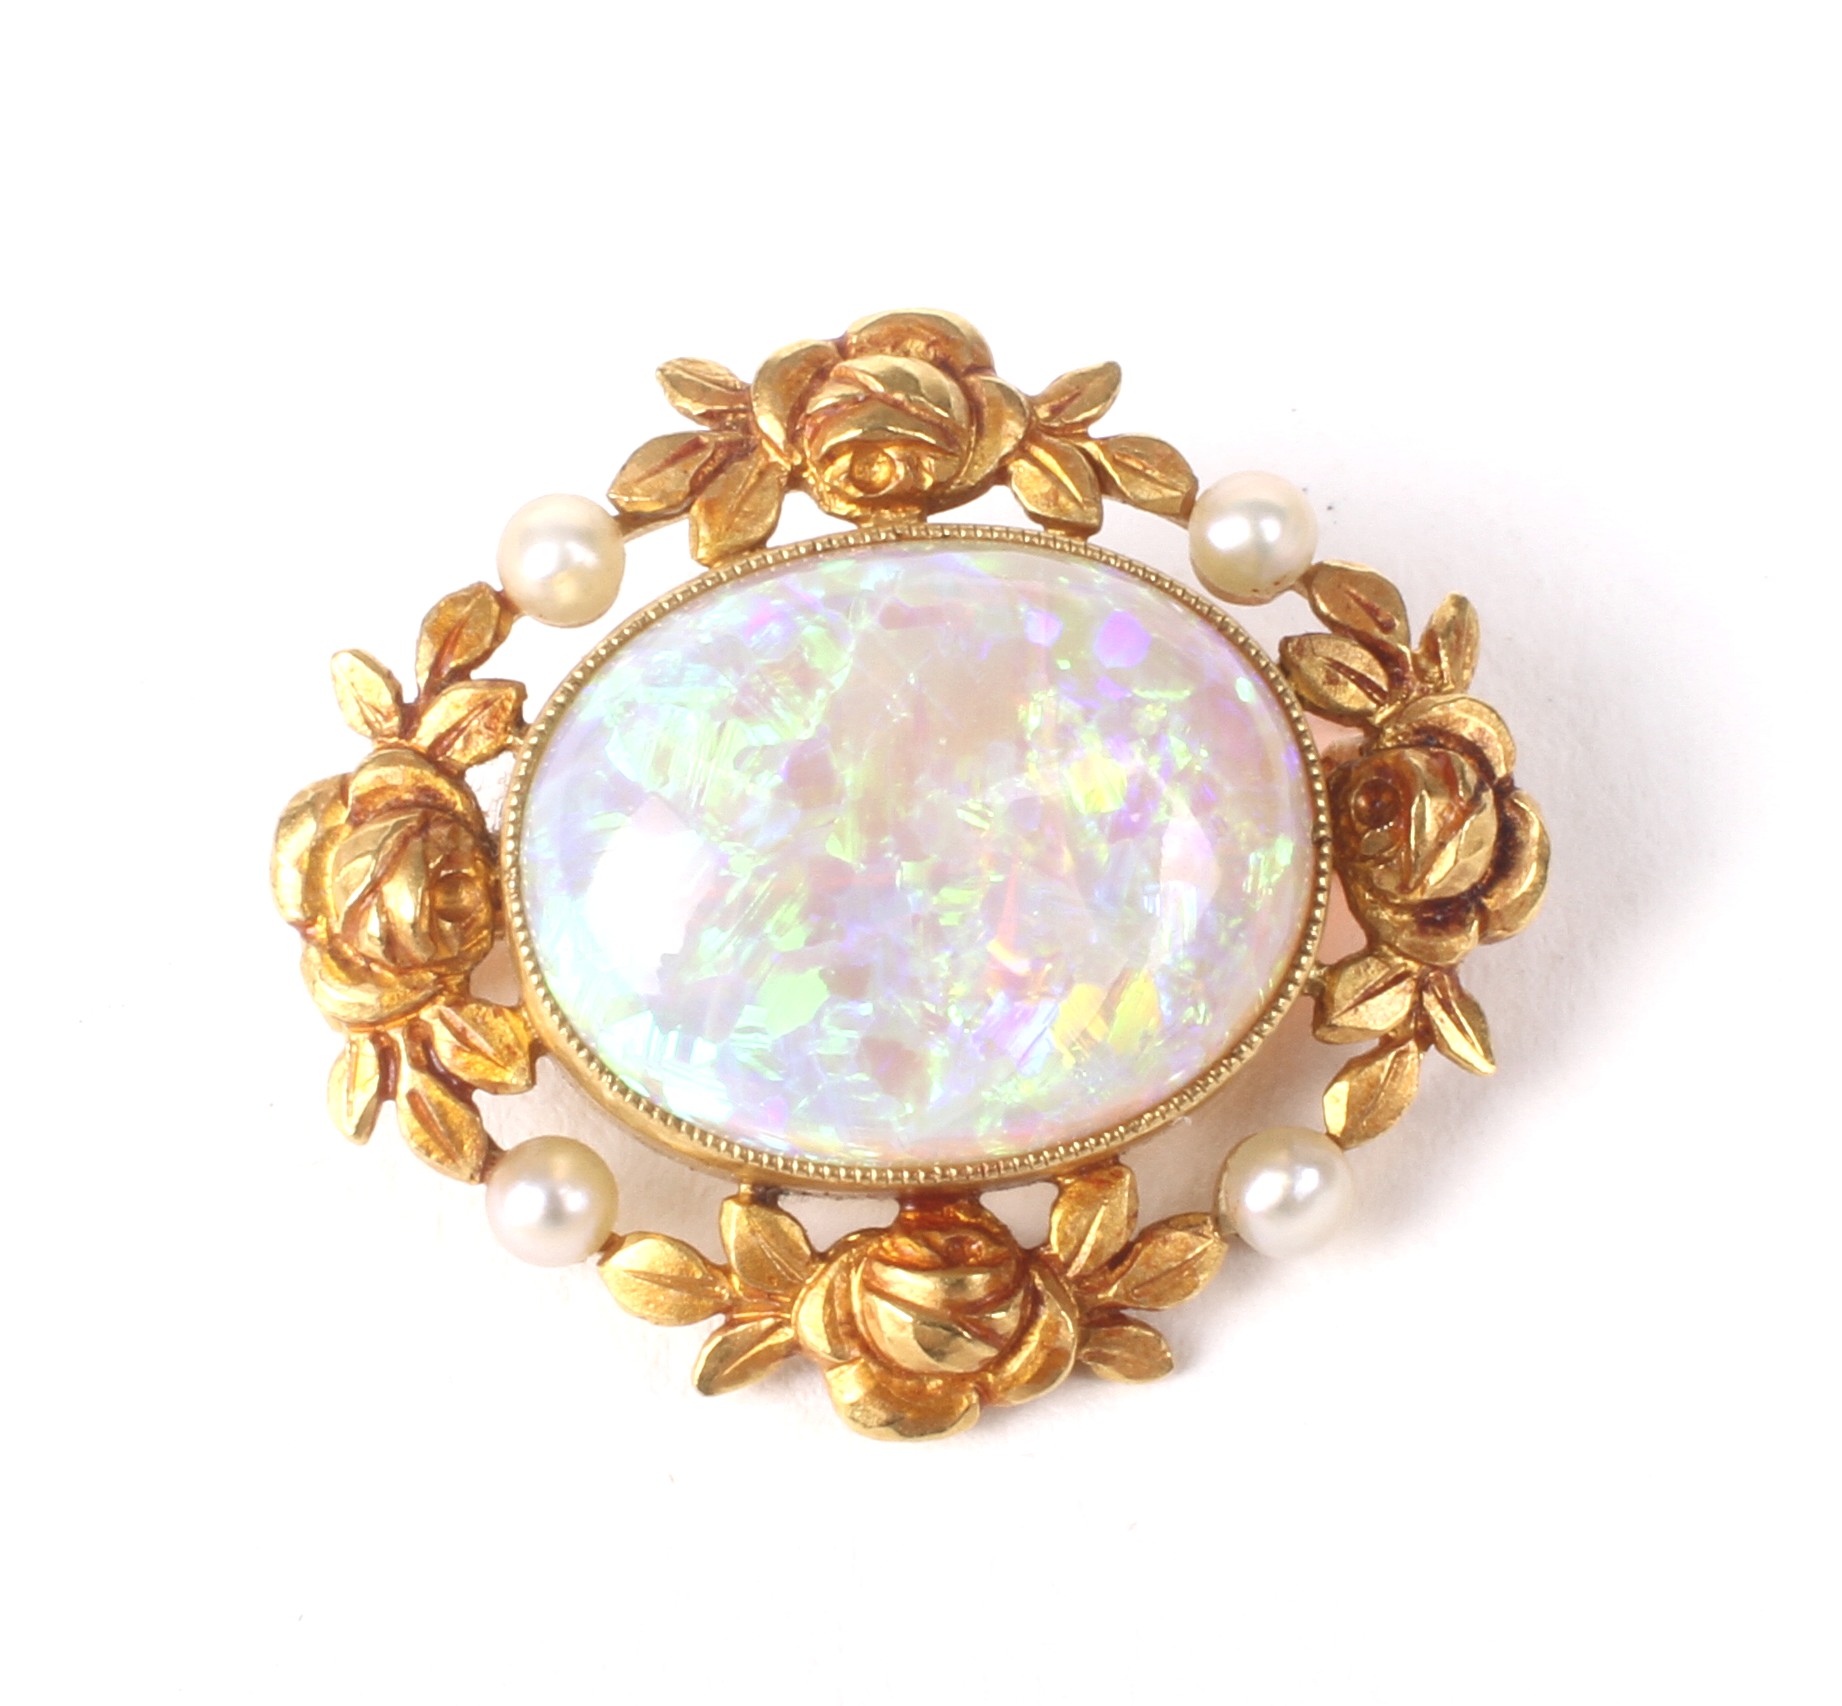 An early 20th century Continental gold, opal and seed-pearl brooch. - Image 3 of 4